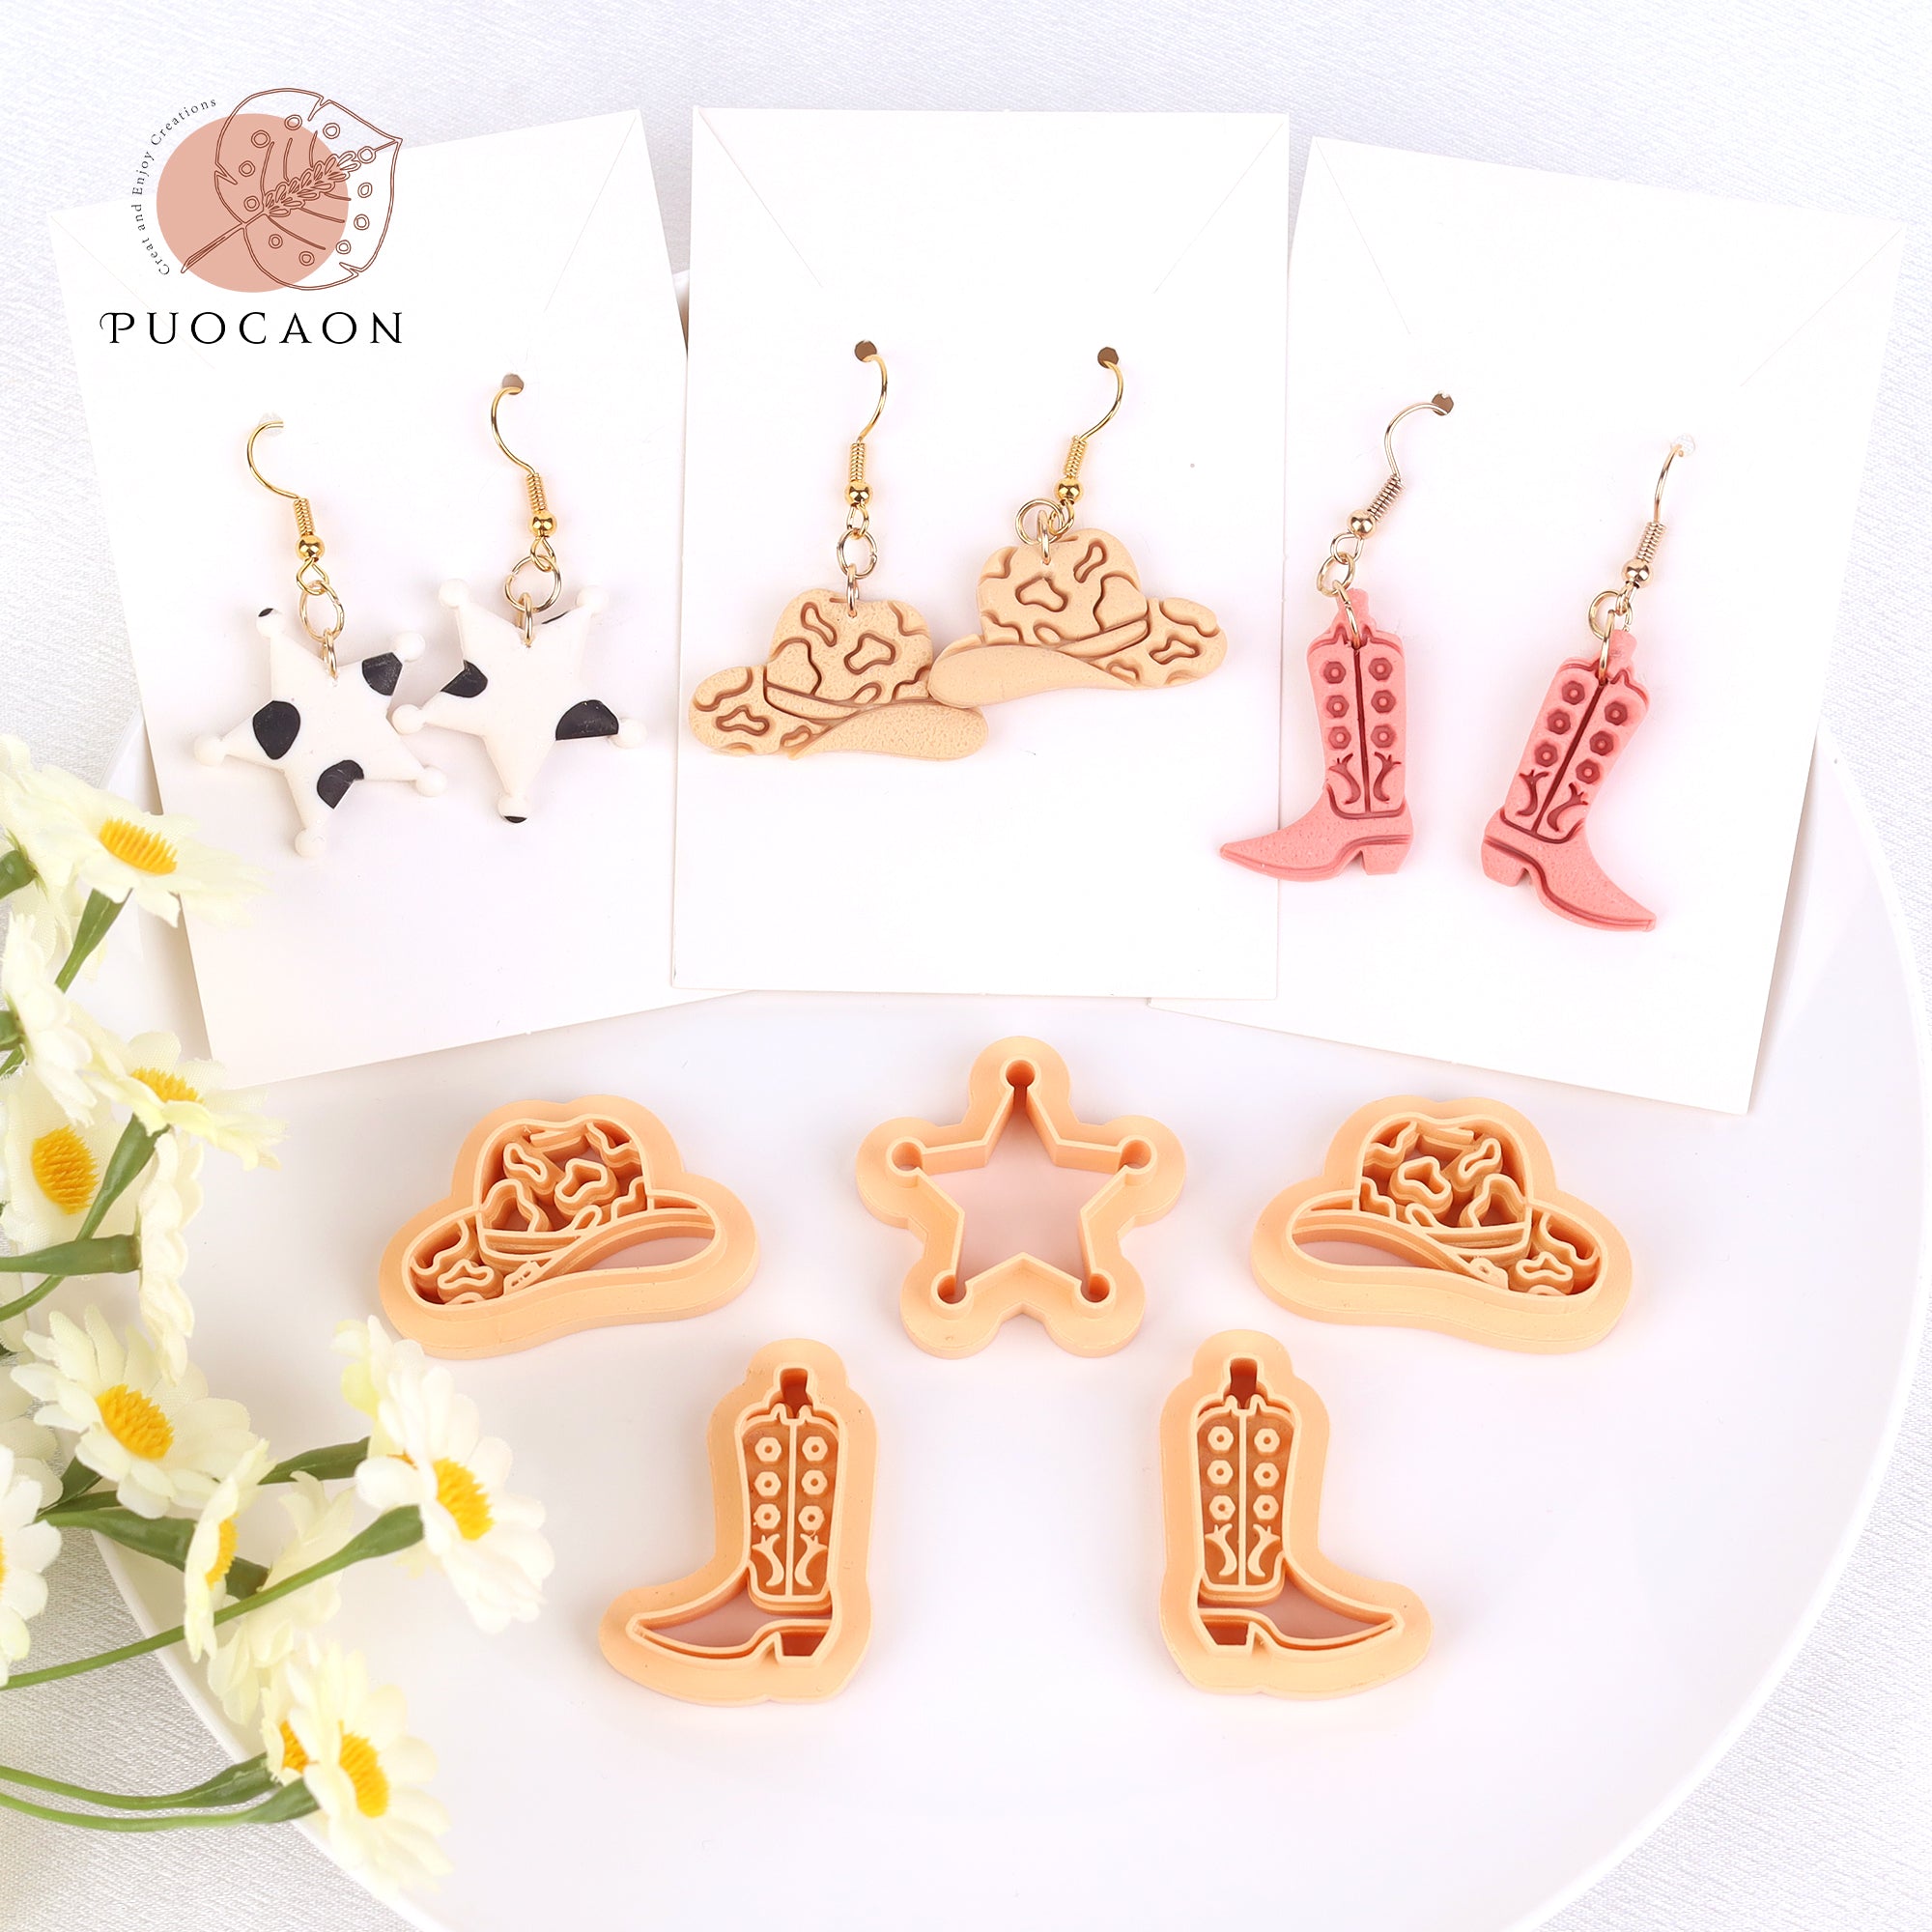 Puocaon Cowboy Polymer Clay Cutters 6 Pcs